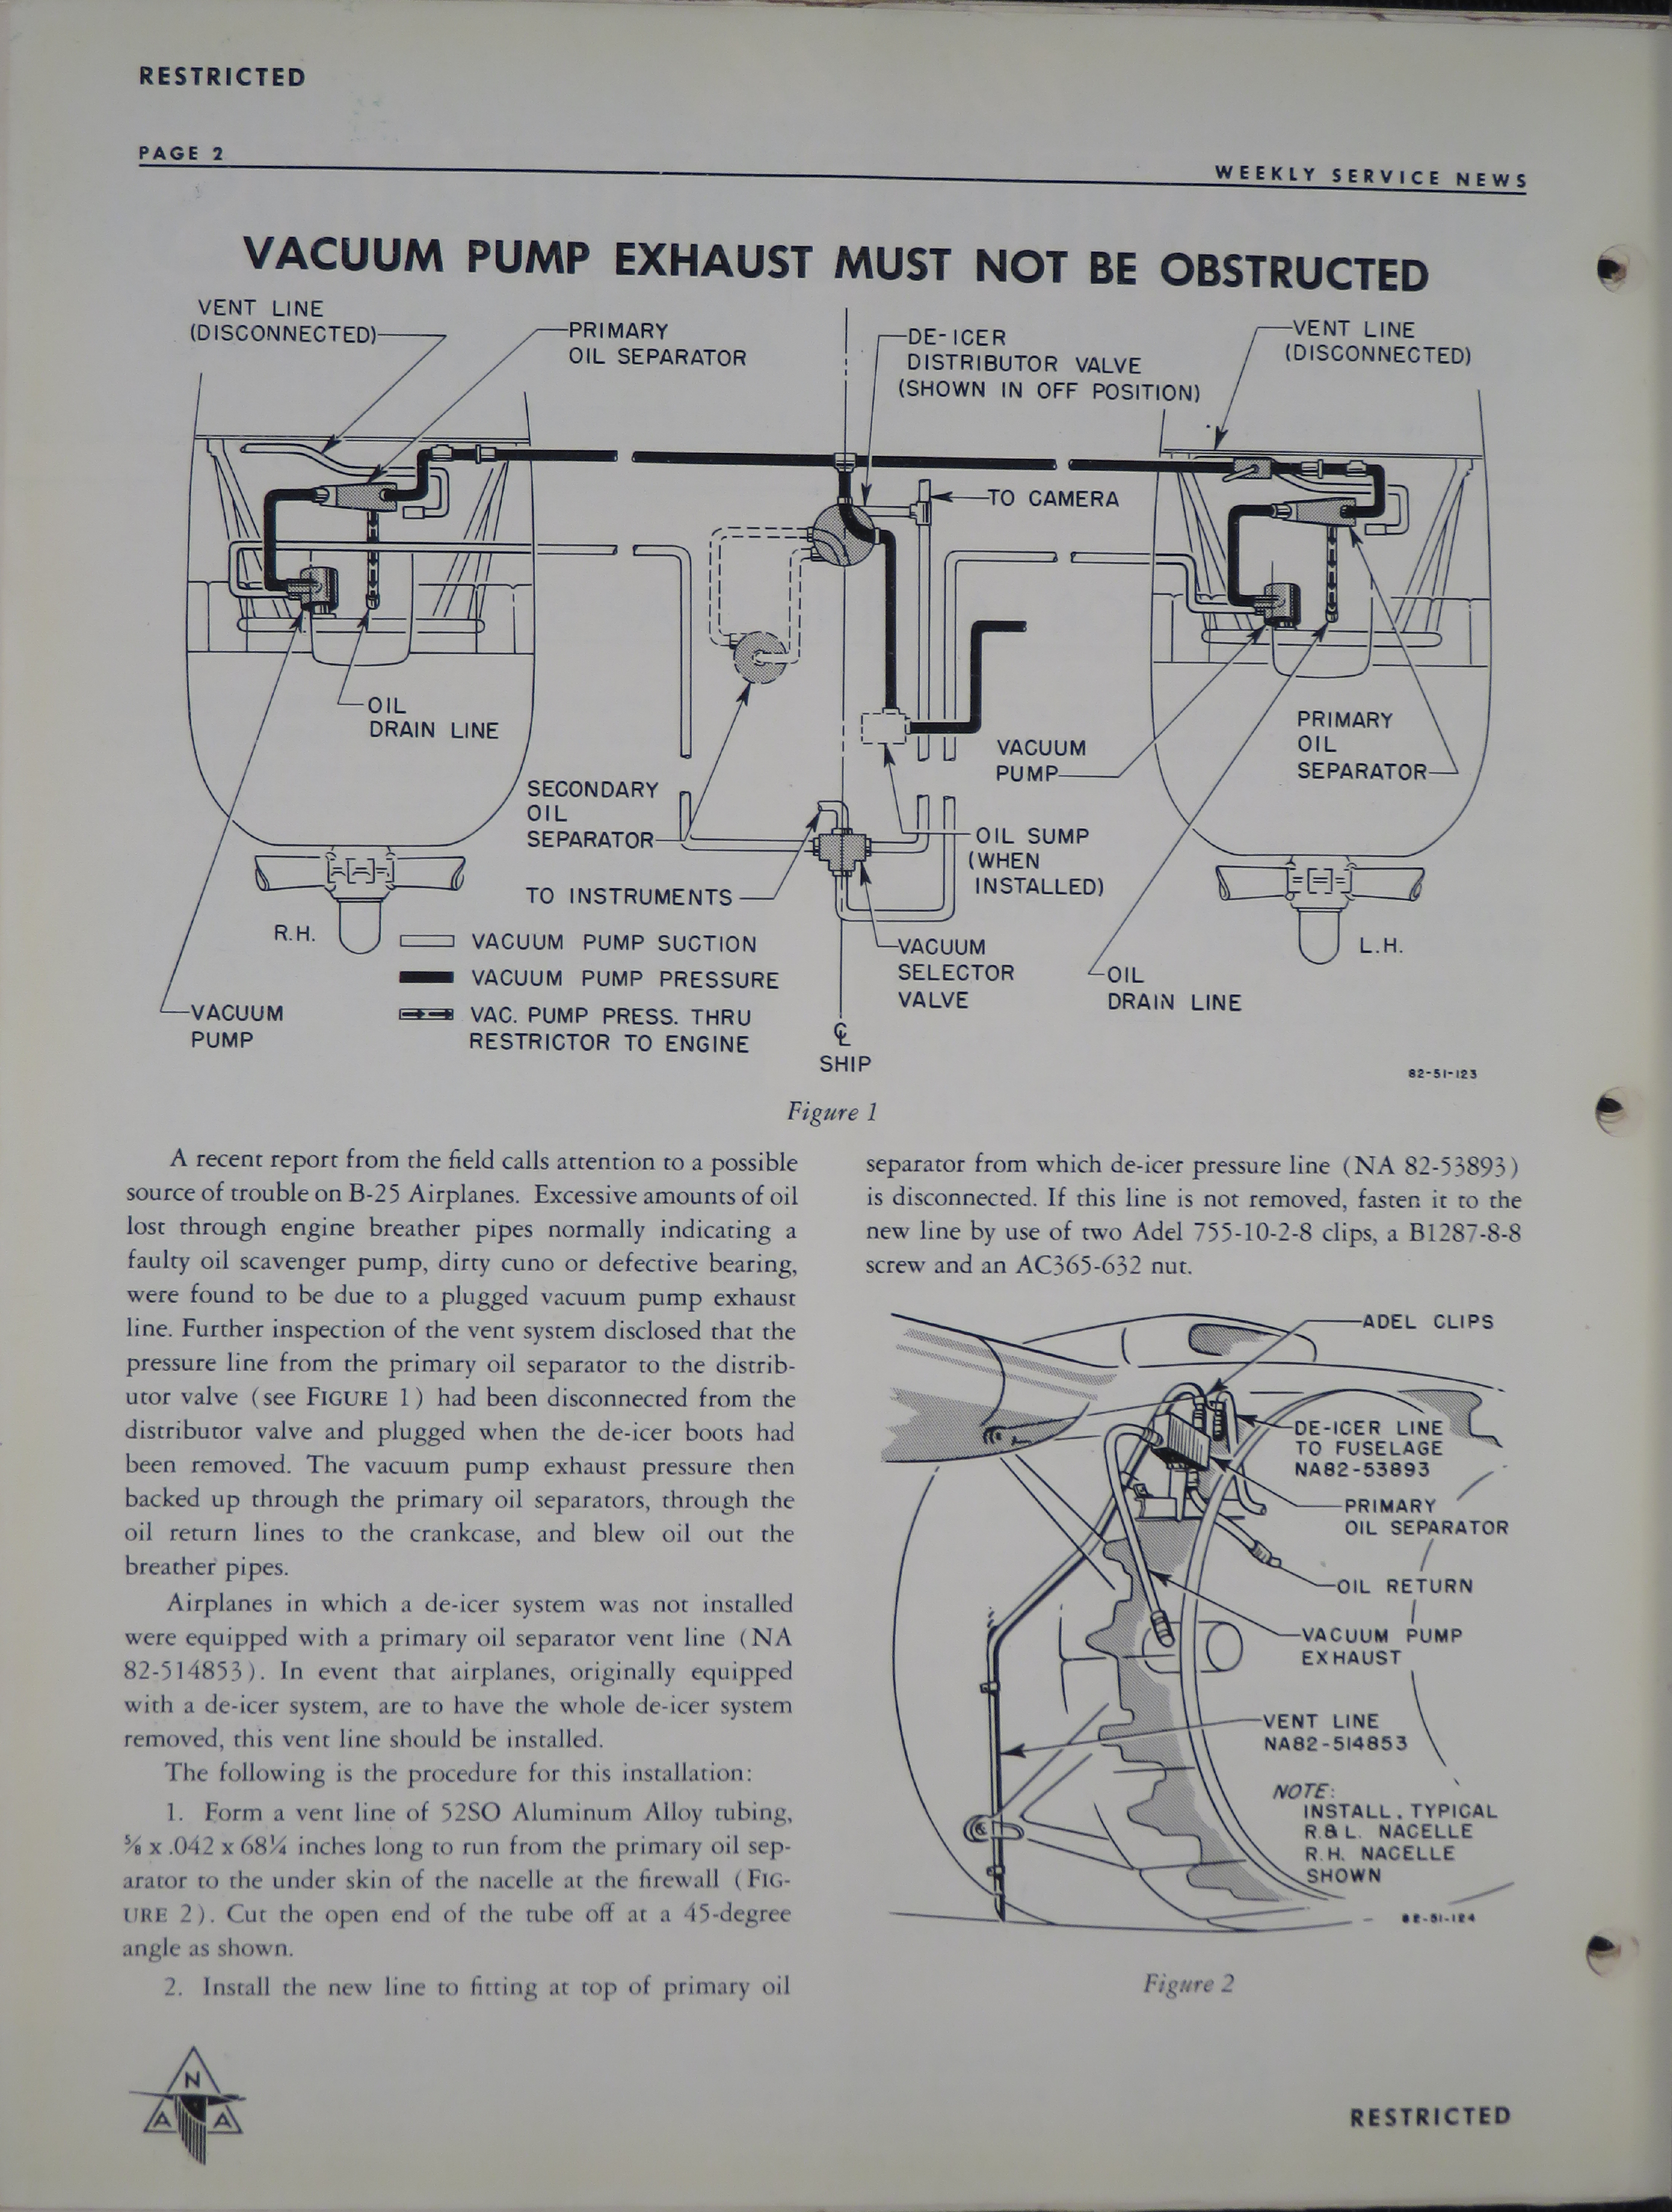 Sample page 2 from AirCorps Library document: Volume 2, No. 9 - Weekly Service News